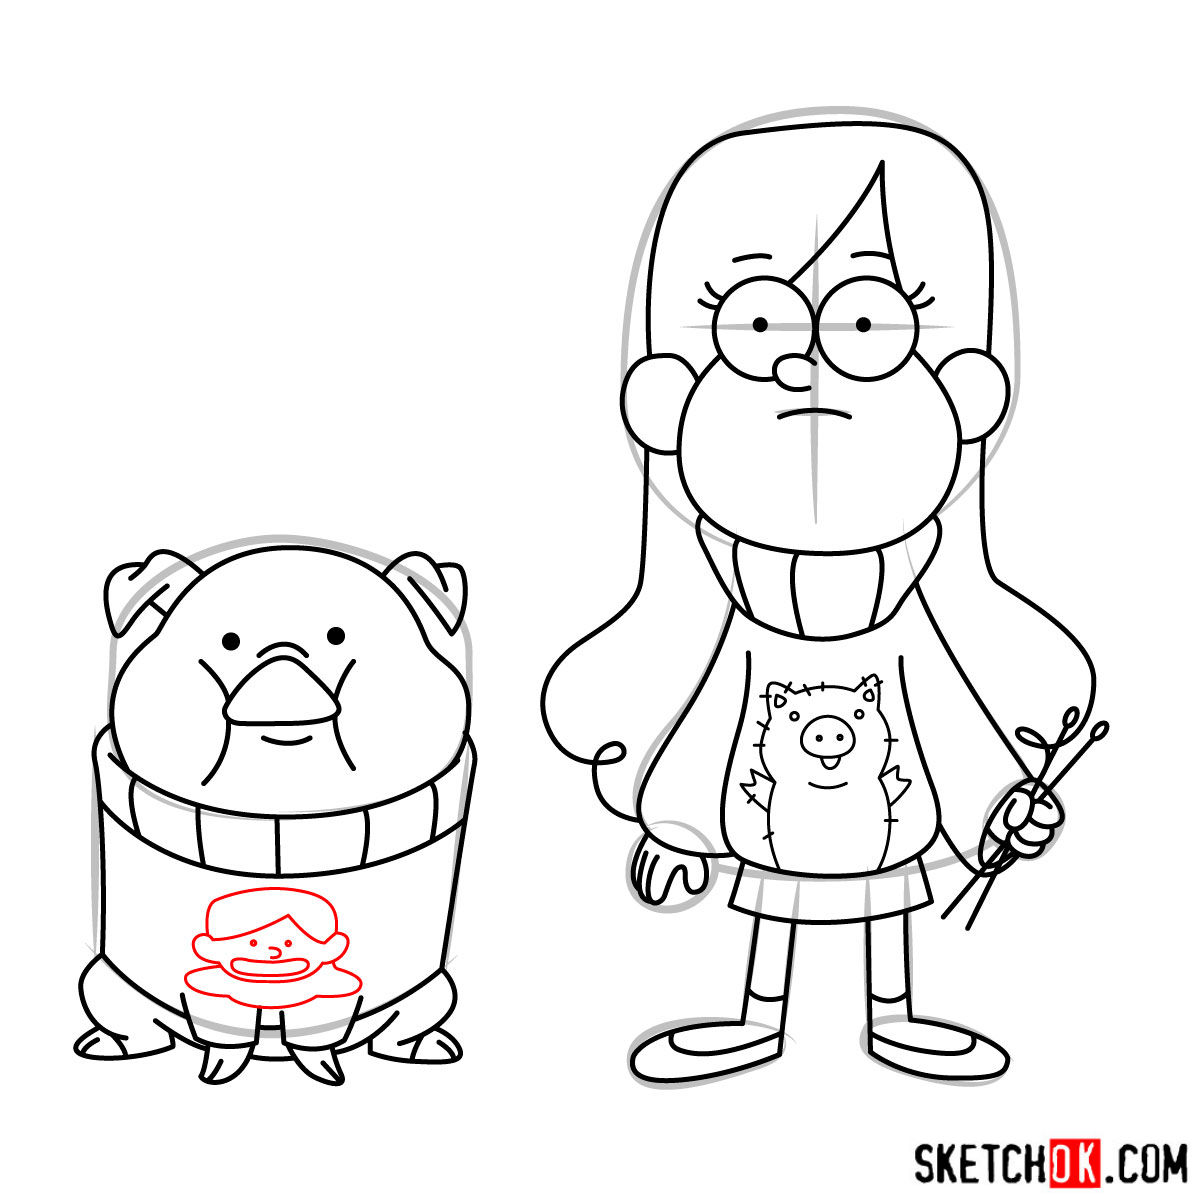 How to draw Mabel Pines with Pig - step 17